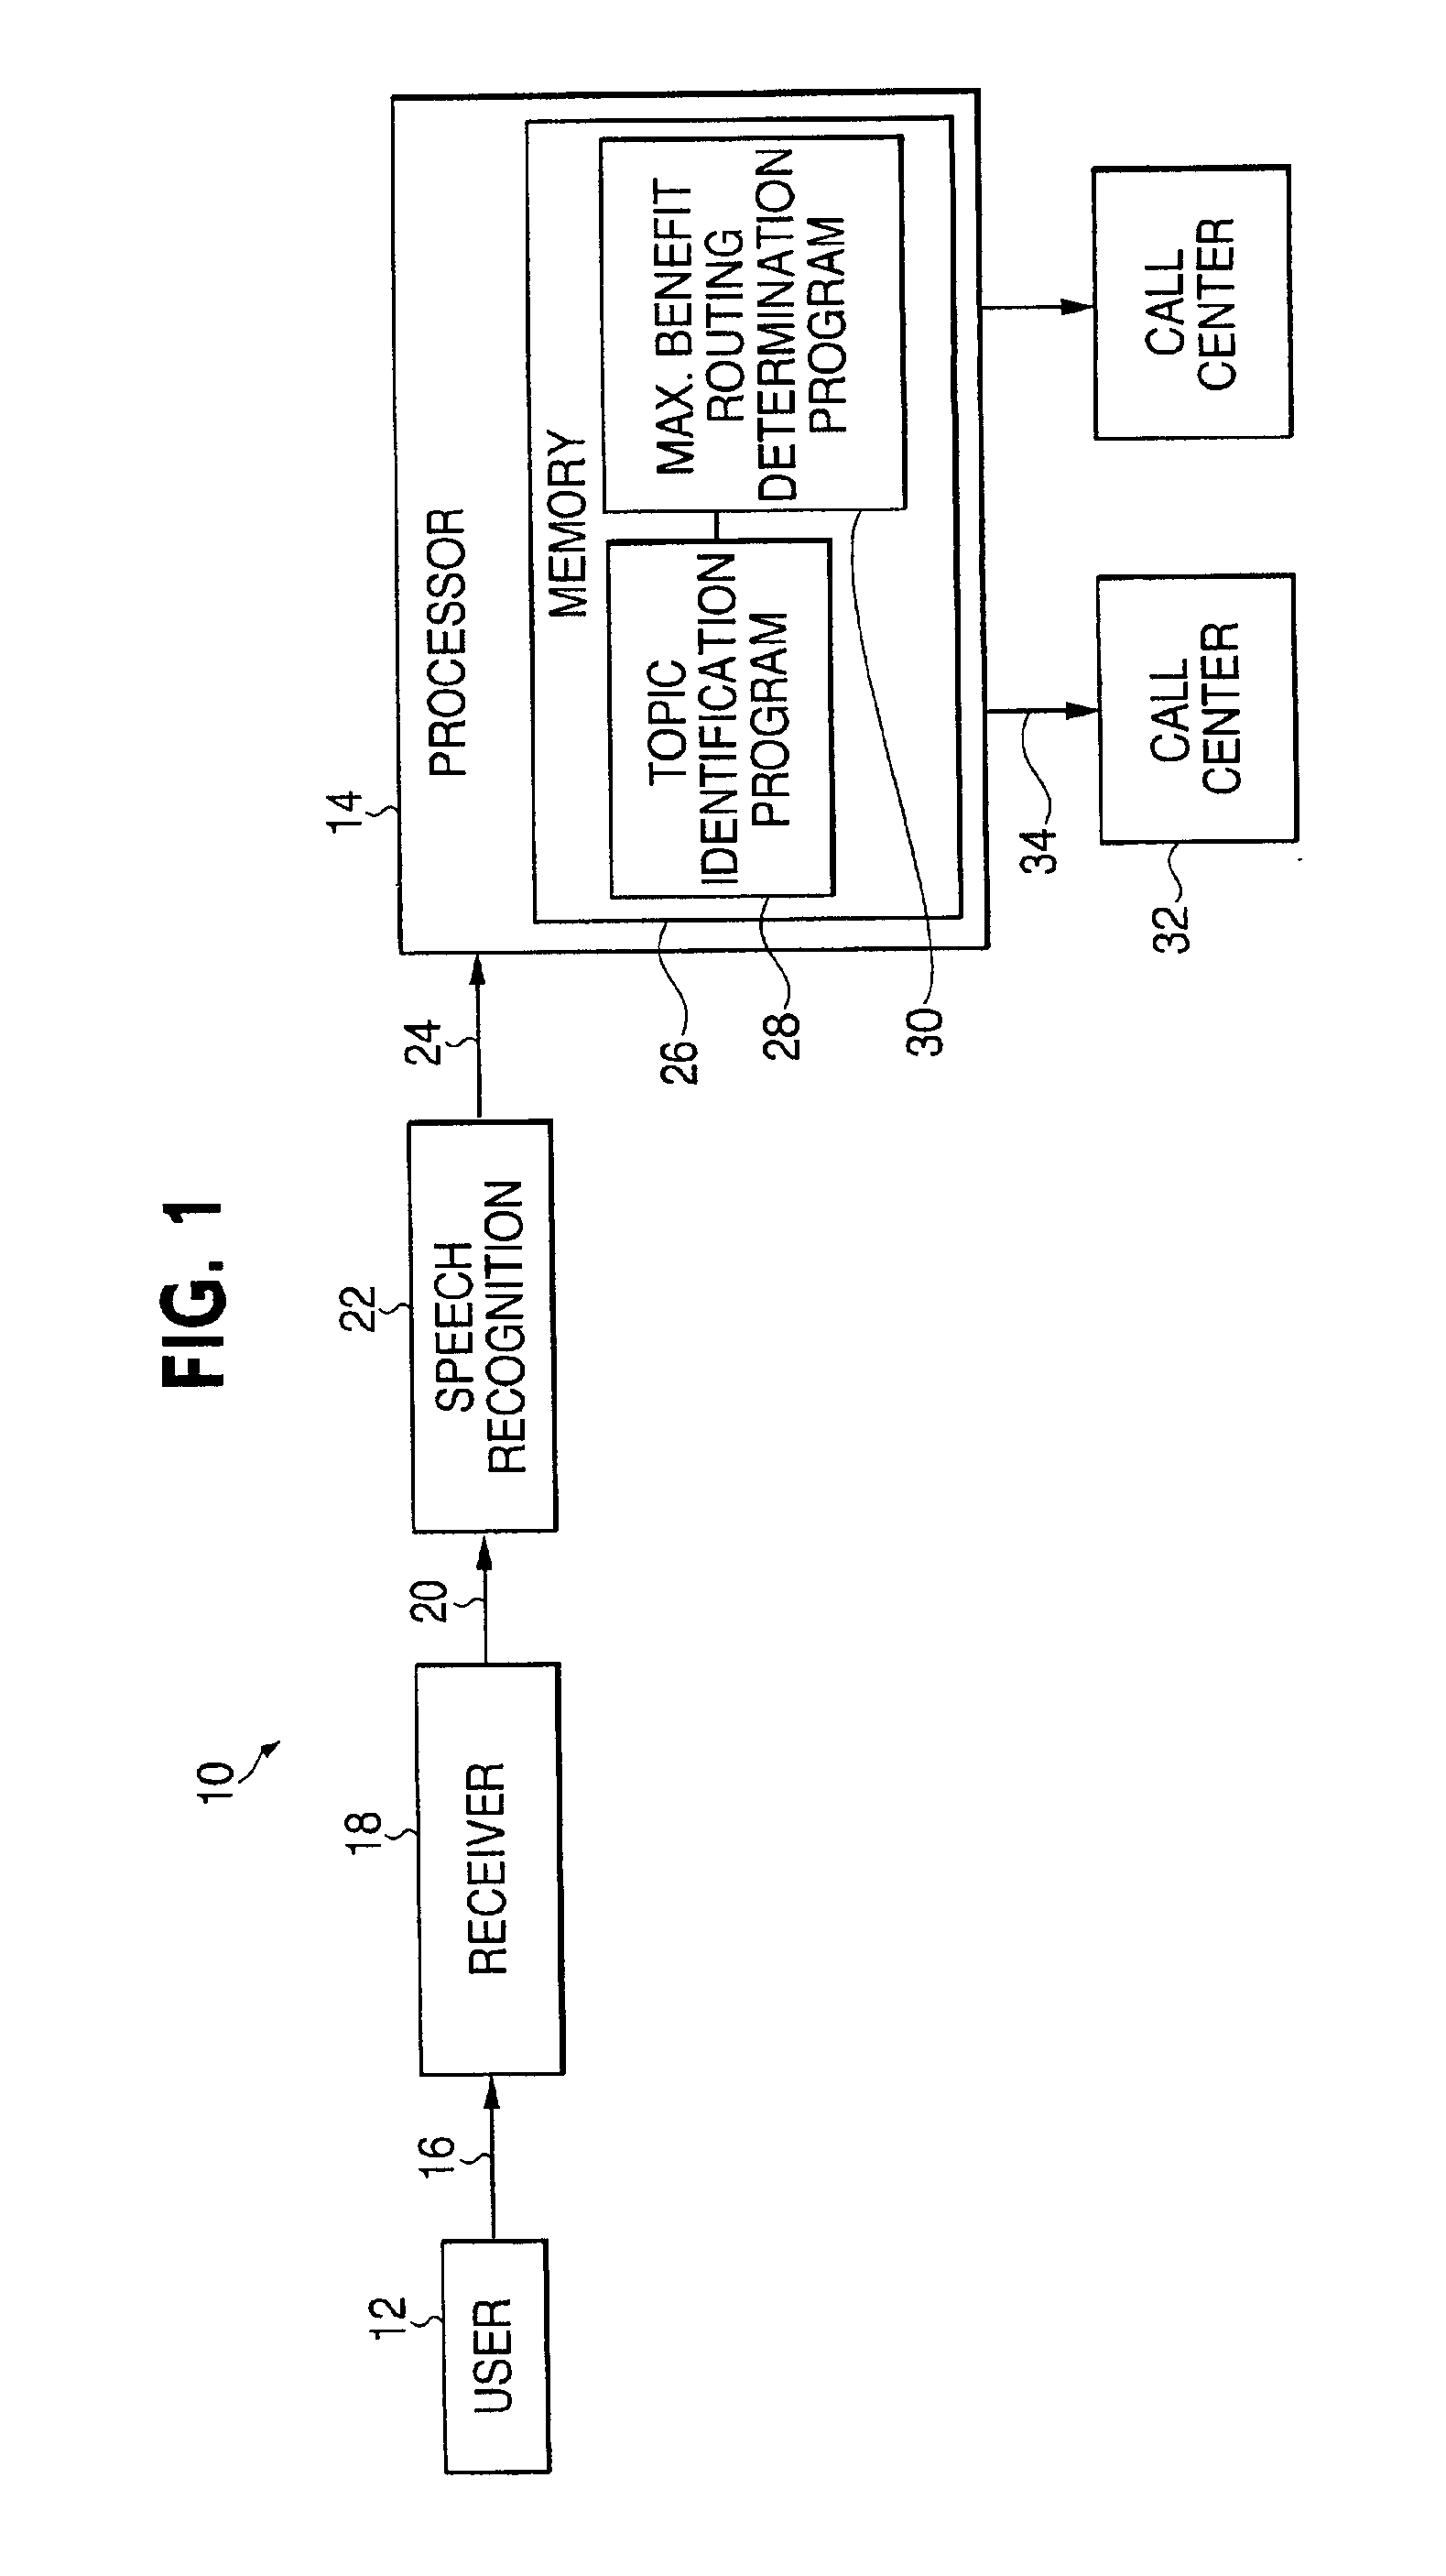 System and method for maximum benefit routing